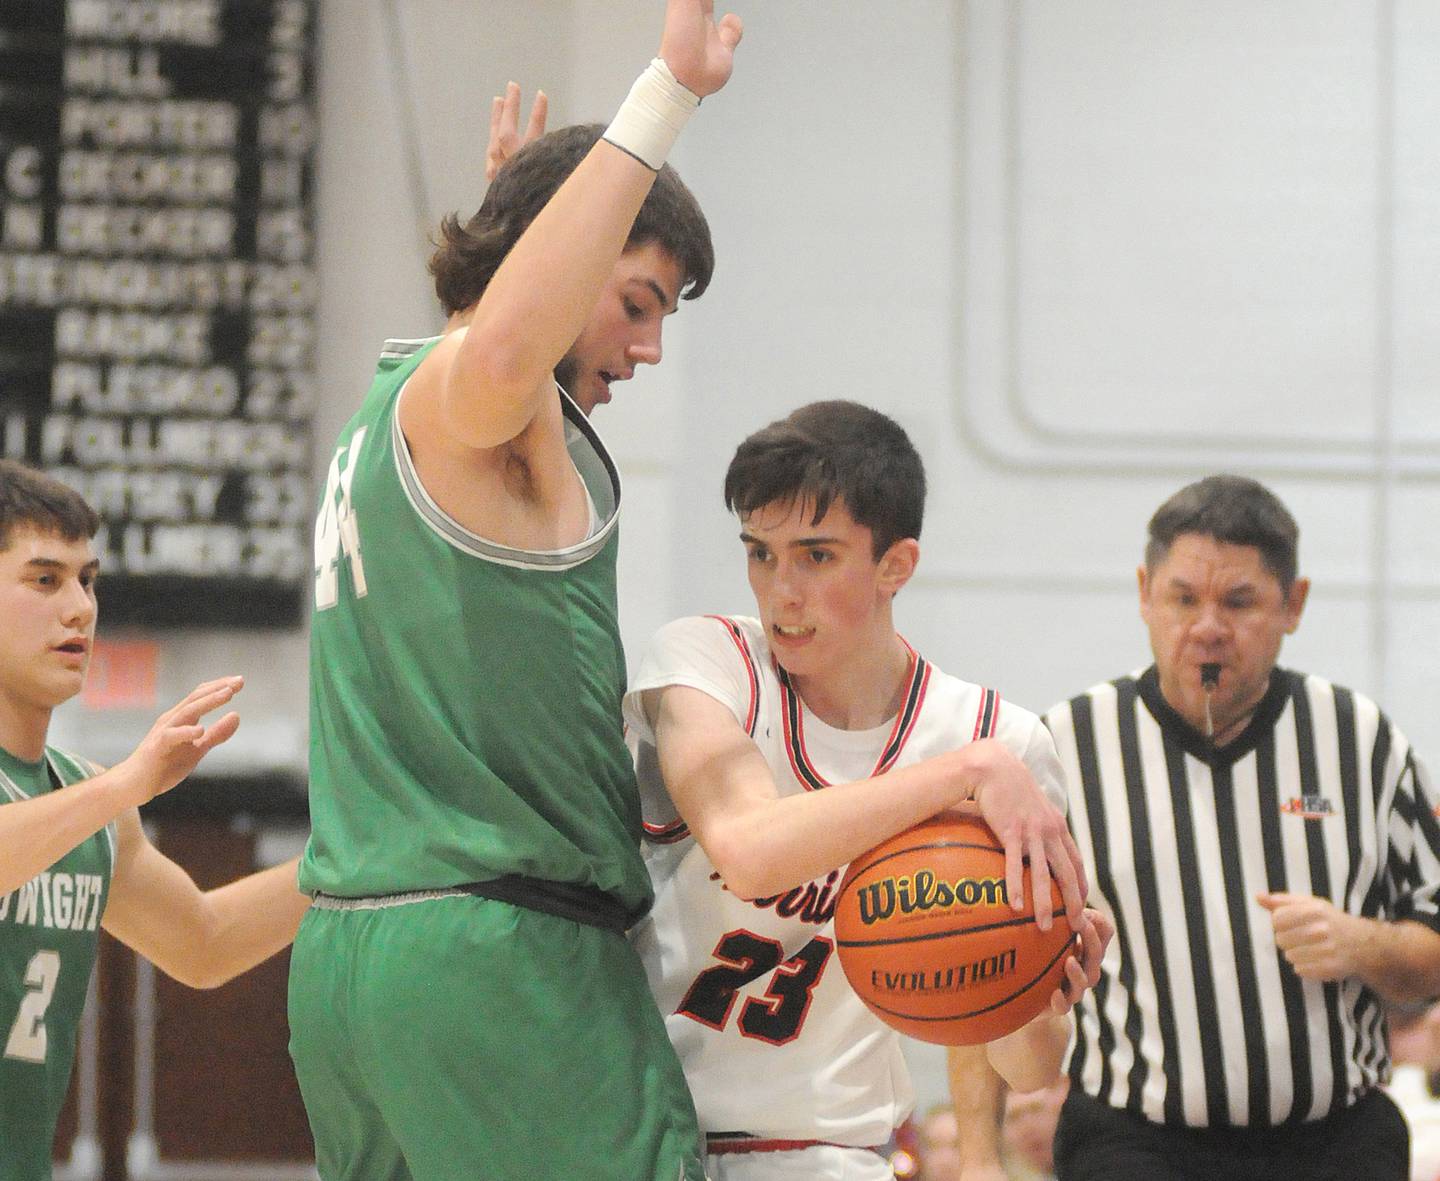 Woodland's Nick Plesko looks to pass around the defense of Dwight's Wyatt Thompson at the Warrior Dome on Friday, Jan. 13, 2023. Thompson posted 28 points, 16 rebounds and three blocks in the Trojans' 51-40 Tri-County Conference win over the host Warriors.